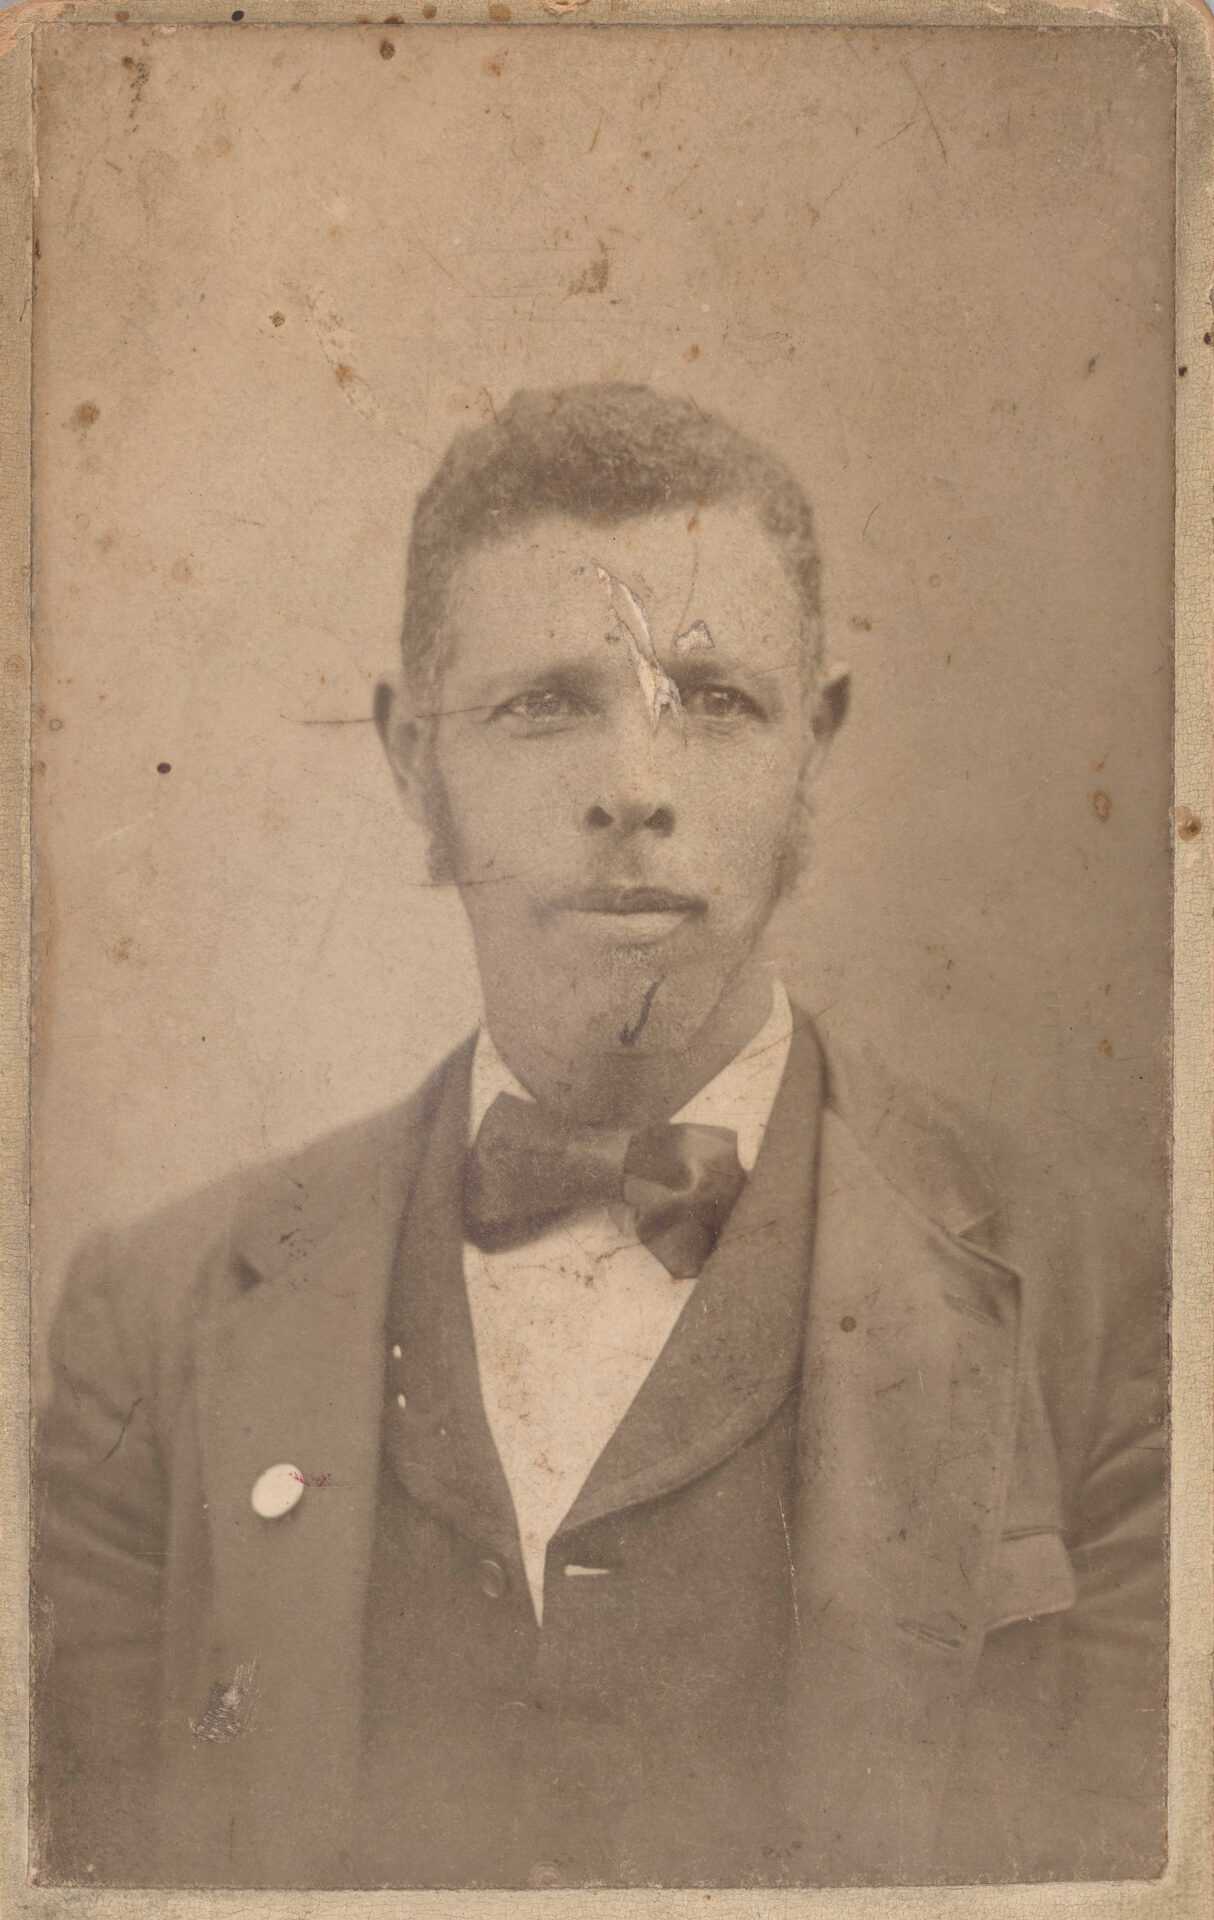 Carte-de-visite bust-length portrait of Marquis Peterson. He is wearing a dark-colored jacket, vest, bowtie and a light-colored shirt. He is looking at the camera and has large sideburns. A button can be seen on his right lapel. The back of the card has black construction paper adhered to it. On the back at the bottom of the card is a white label with back lettering that reads “Marcus Peterson.”